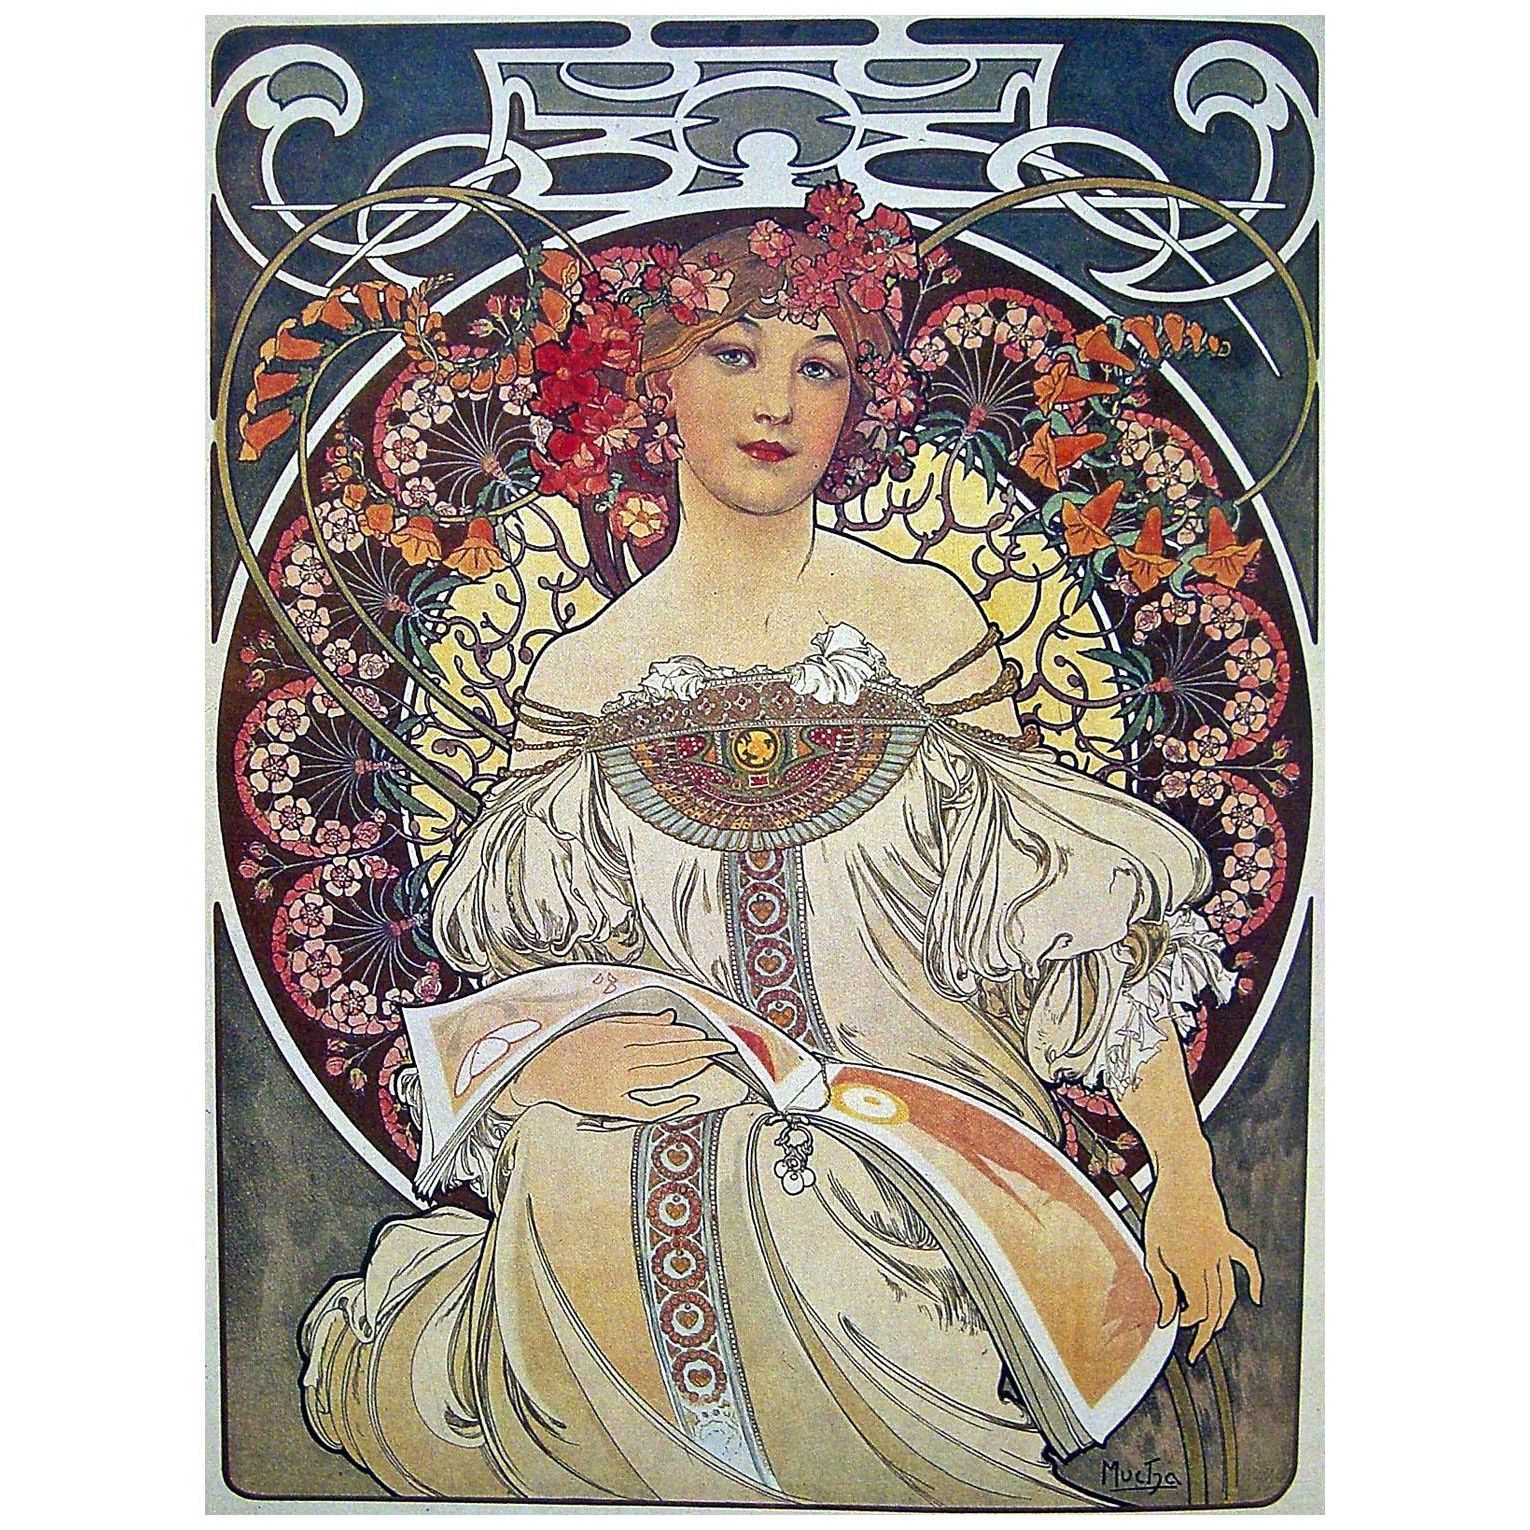 Alfons Mucha. Reverie. 1897. Color lithograph